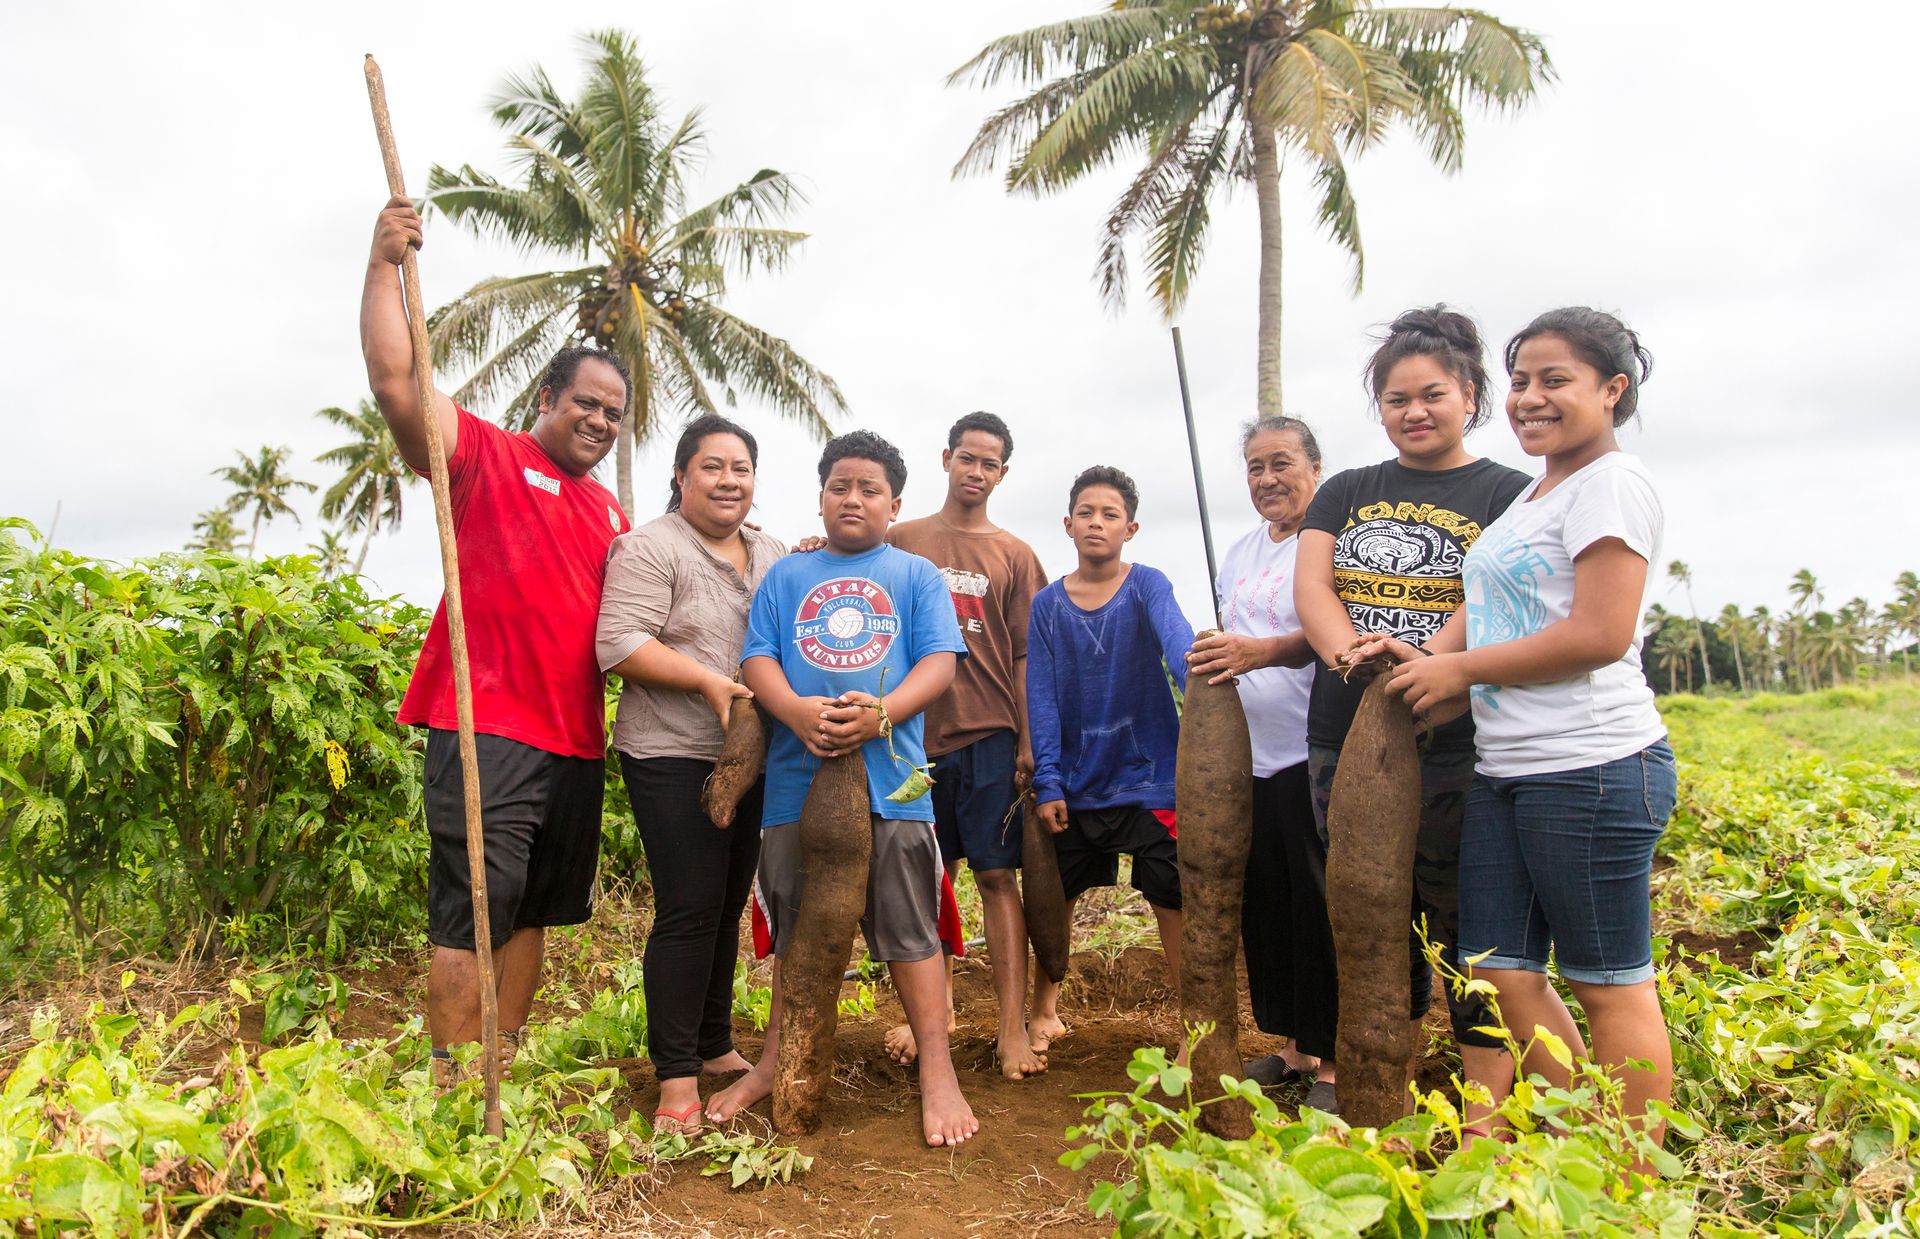 Planting and harvesting crops gives the Fanguna family plenty of time to spend together.